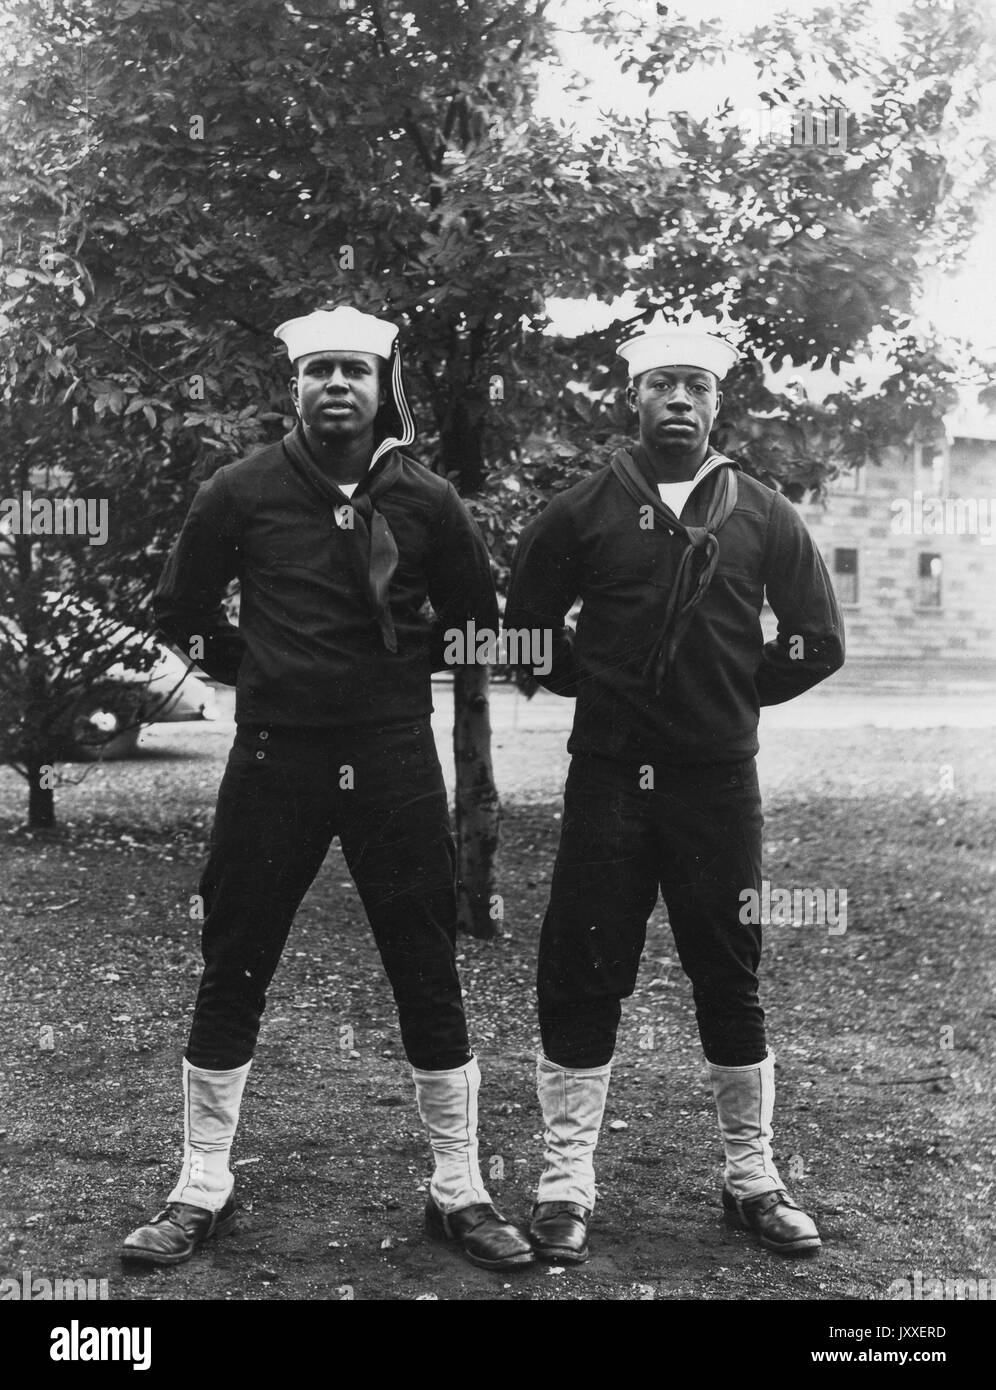 Portrait of two African American US Navy Sailors standing in front of a tree, they are both wearing dark colored Sailor uniforms and light colored Sailor hats, both have their arms bent and behind their backs, 1920. Stock Photo